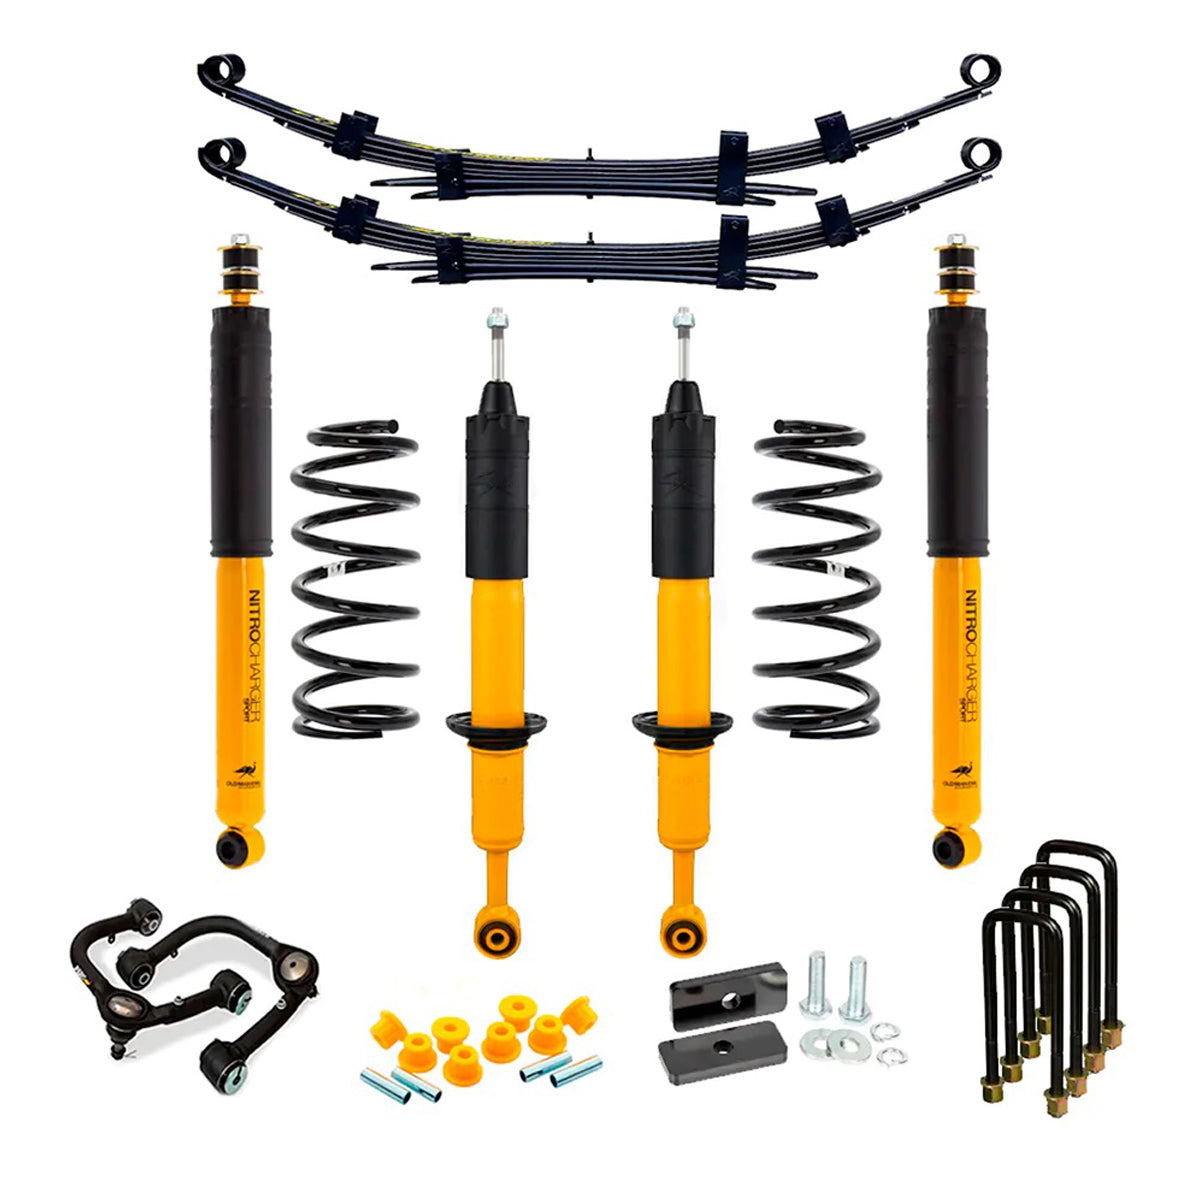 OME 2.5 inch Lift Kit for Tacoma (16-23) - Front Shocks Assembly